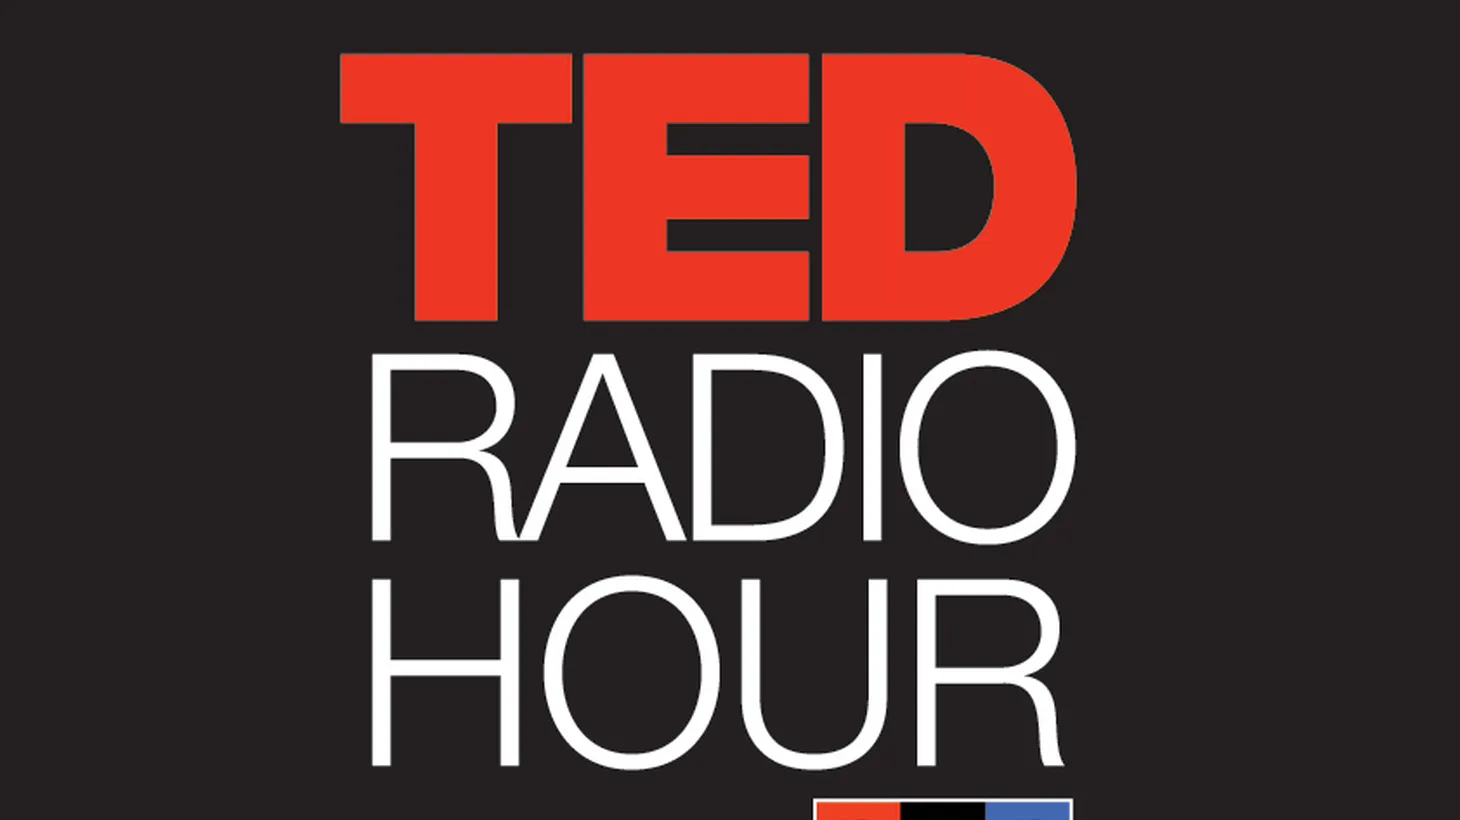 What makes us who we are? How do parents mold children into who they are? In this hour, TED speakers reflect on how our upbringing shapes us.